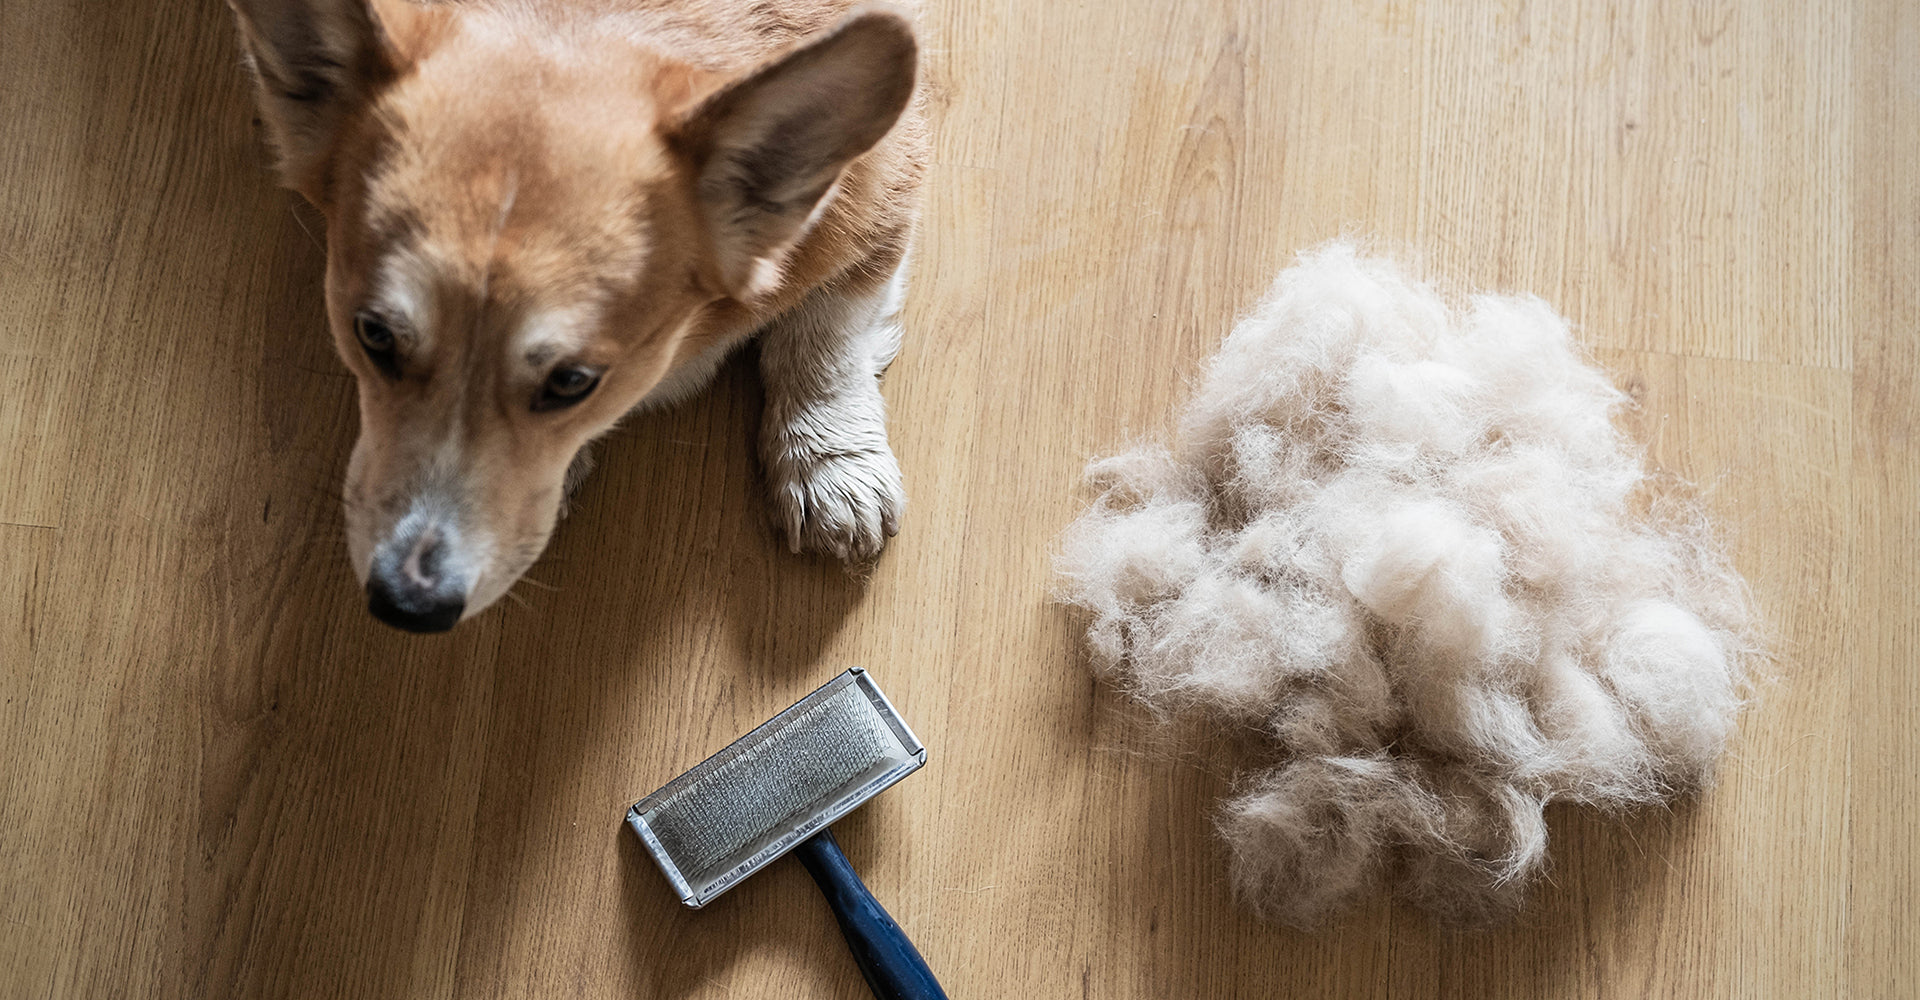 How To Keep Dog Hair From Getting Everywhere